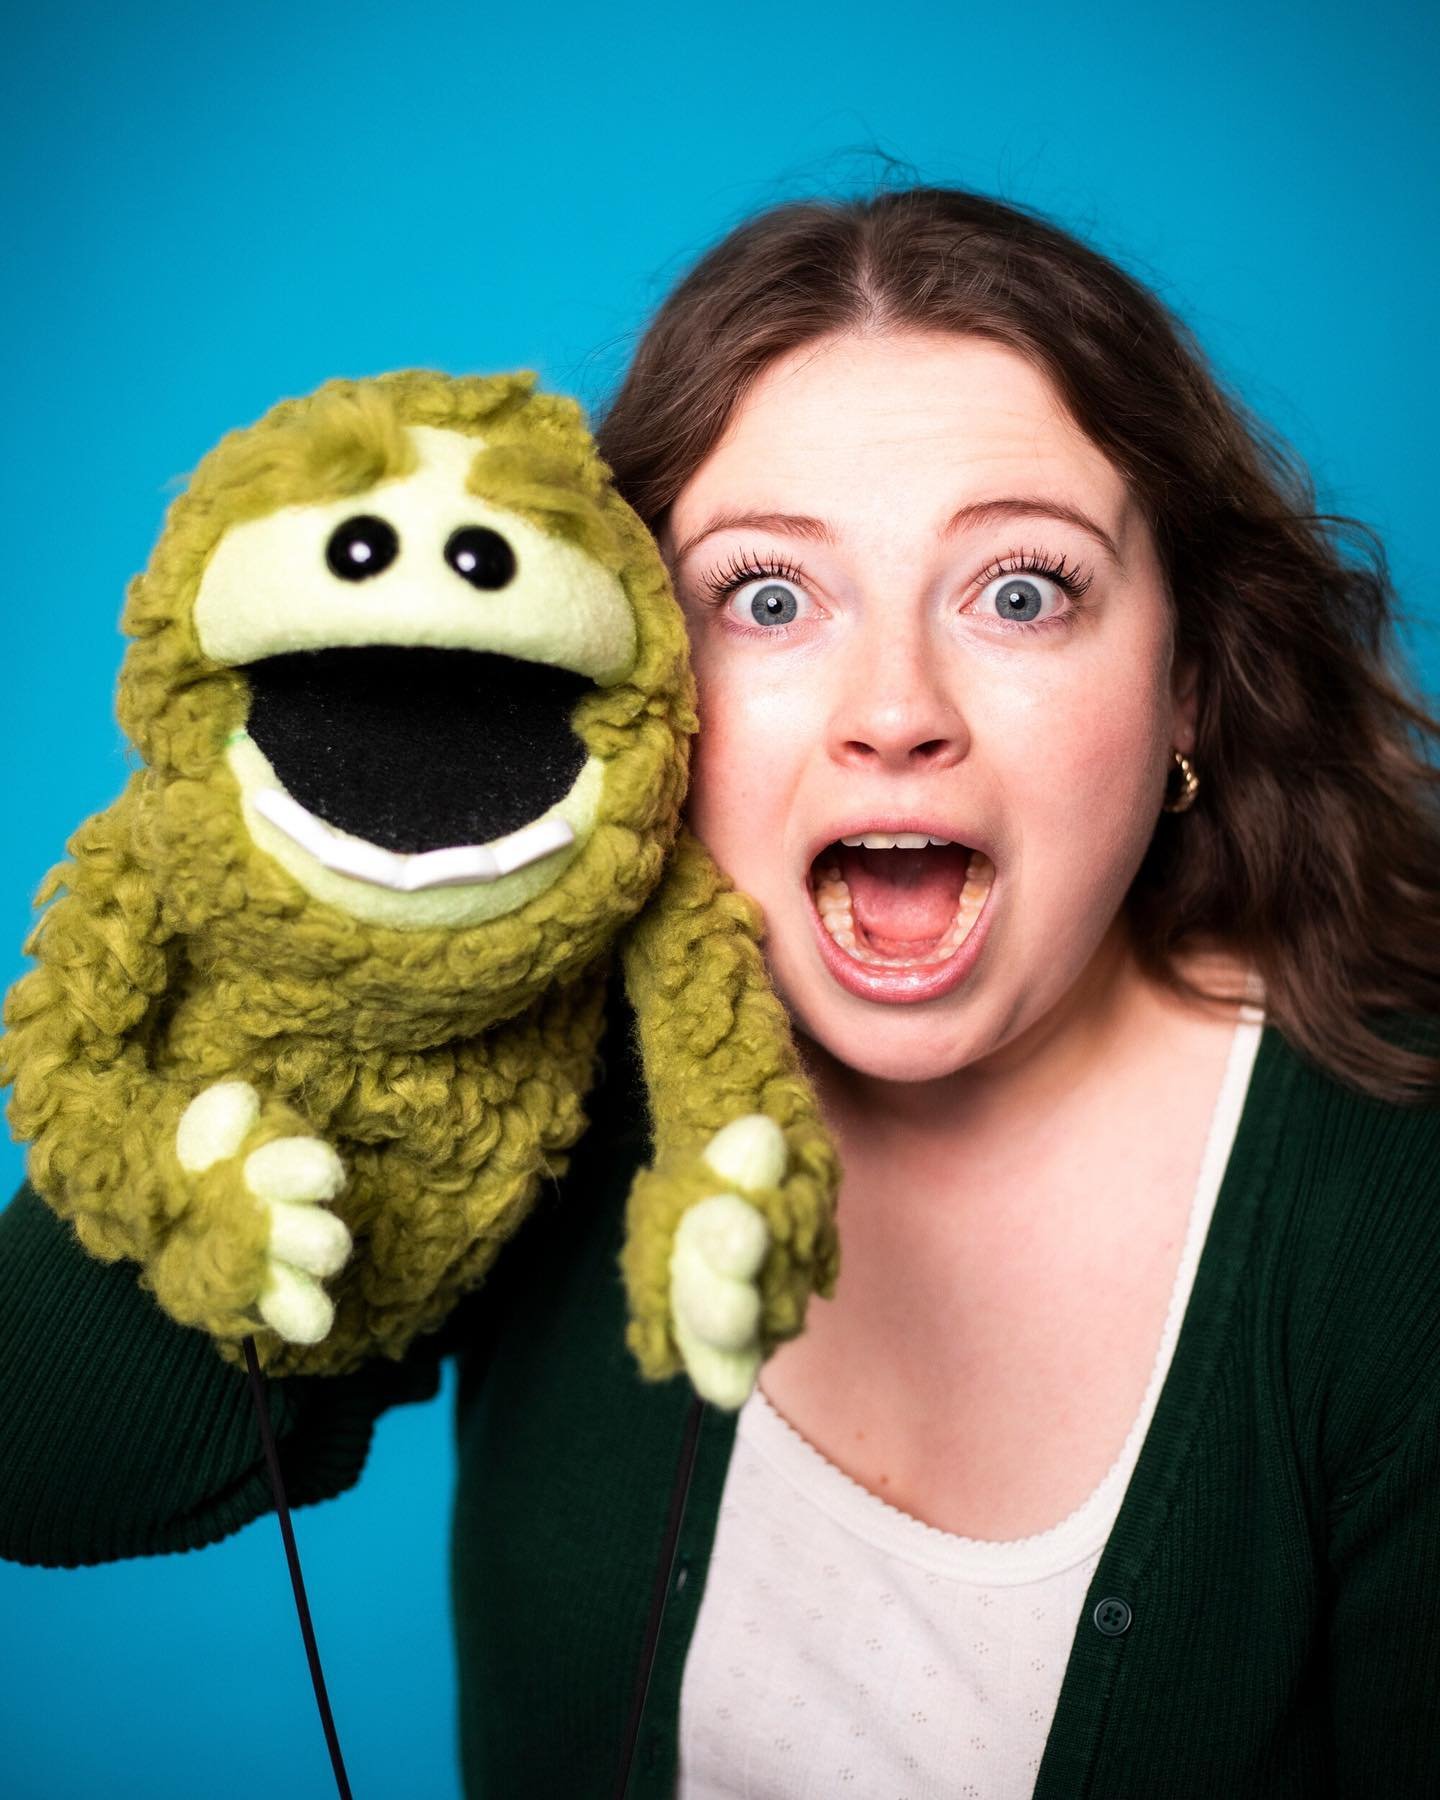 made a last minute decision to bring my puppets to a shoot with @kellykrauterphoto &hellip; the results did not disappoint

more photos of my face coming soon 🙈

the cutest puppet ever made by @blankpuppets

#puppeteer #voiceactor #headshotsession